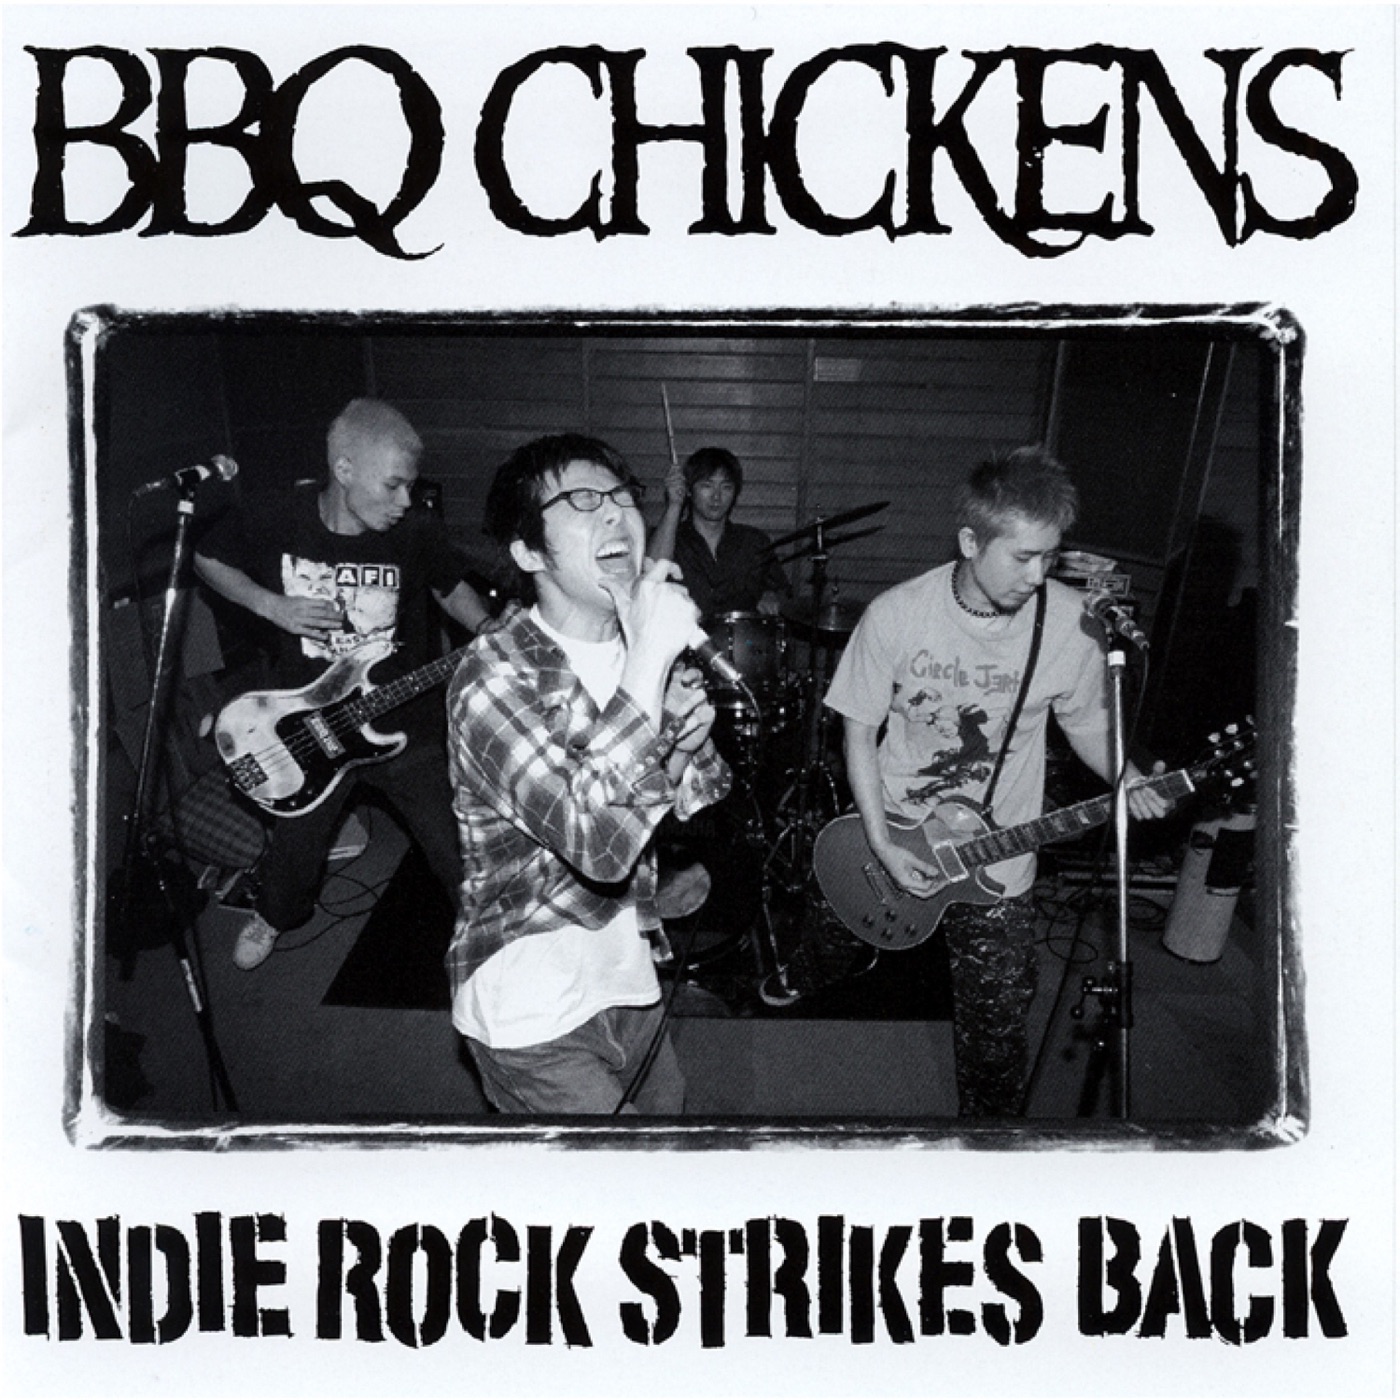 INDIE ROCK STRIKES BACK by BBQ Chickens